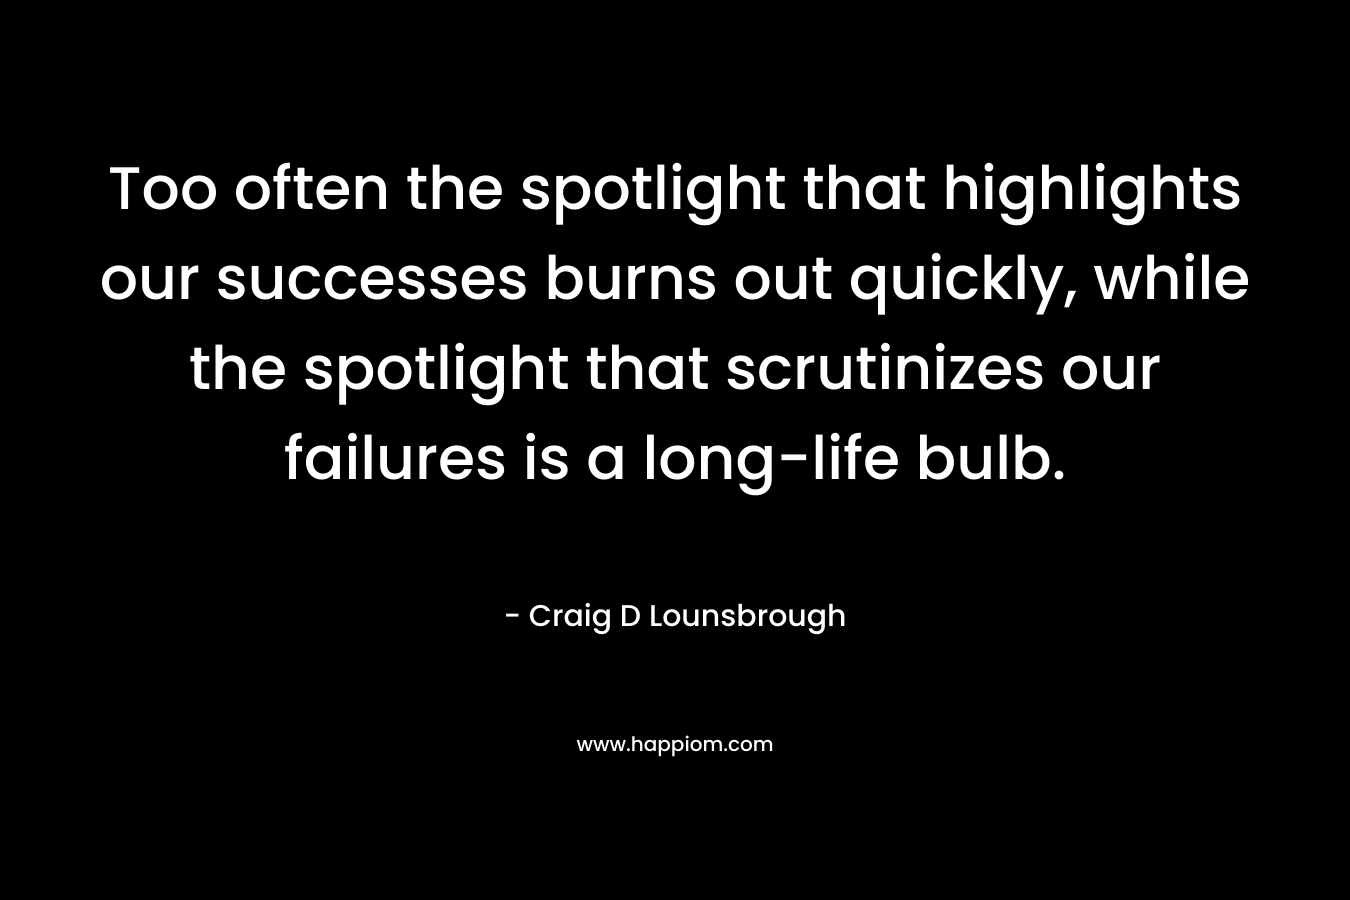 Too often the spotlight that highlights our successes burns out quickly, while the spotlight that scrutinizes our failures is a long-life bulb. – Craig D Lounsbrough